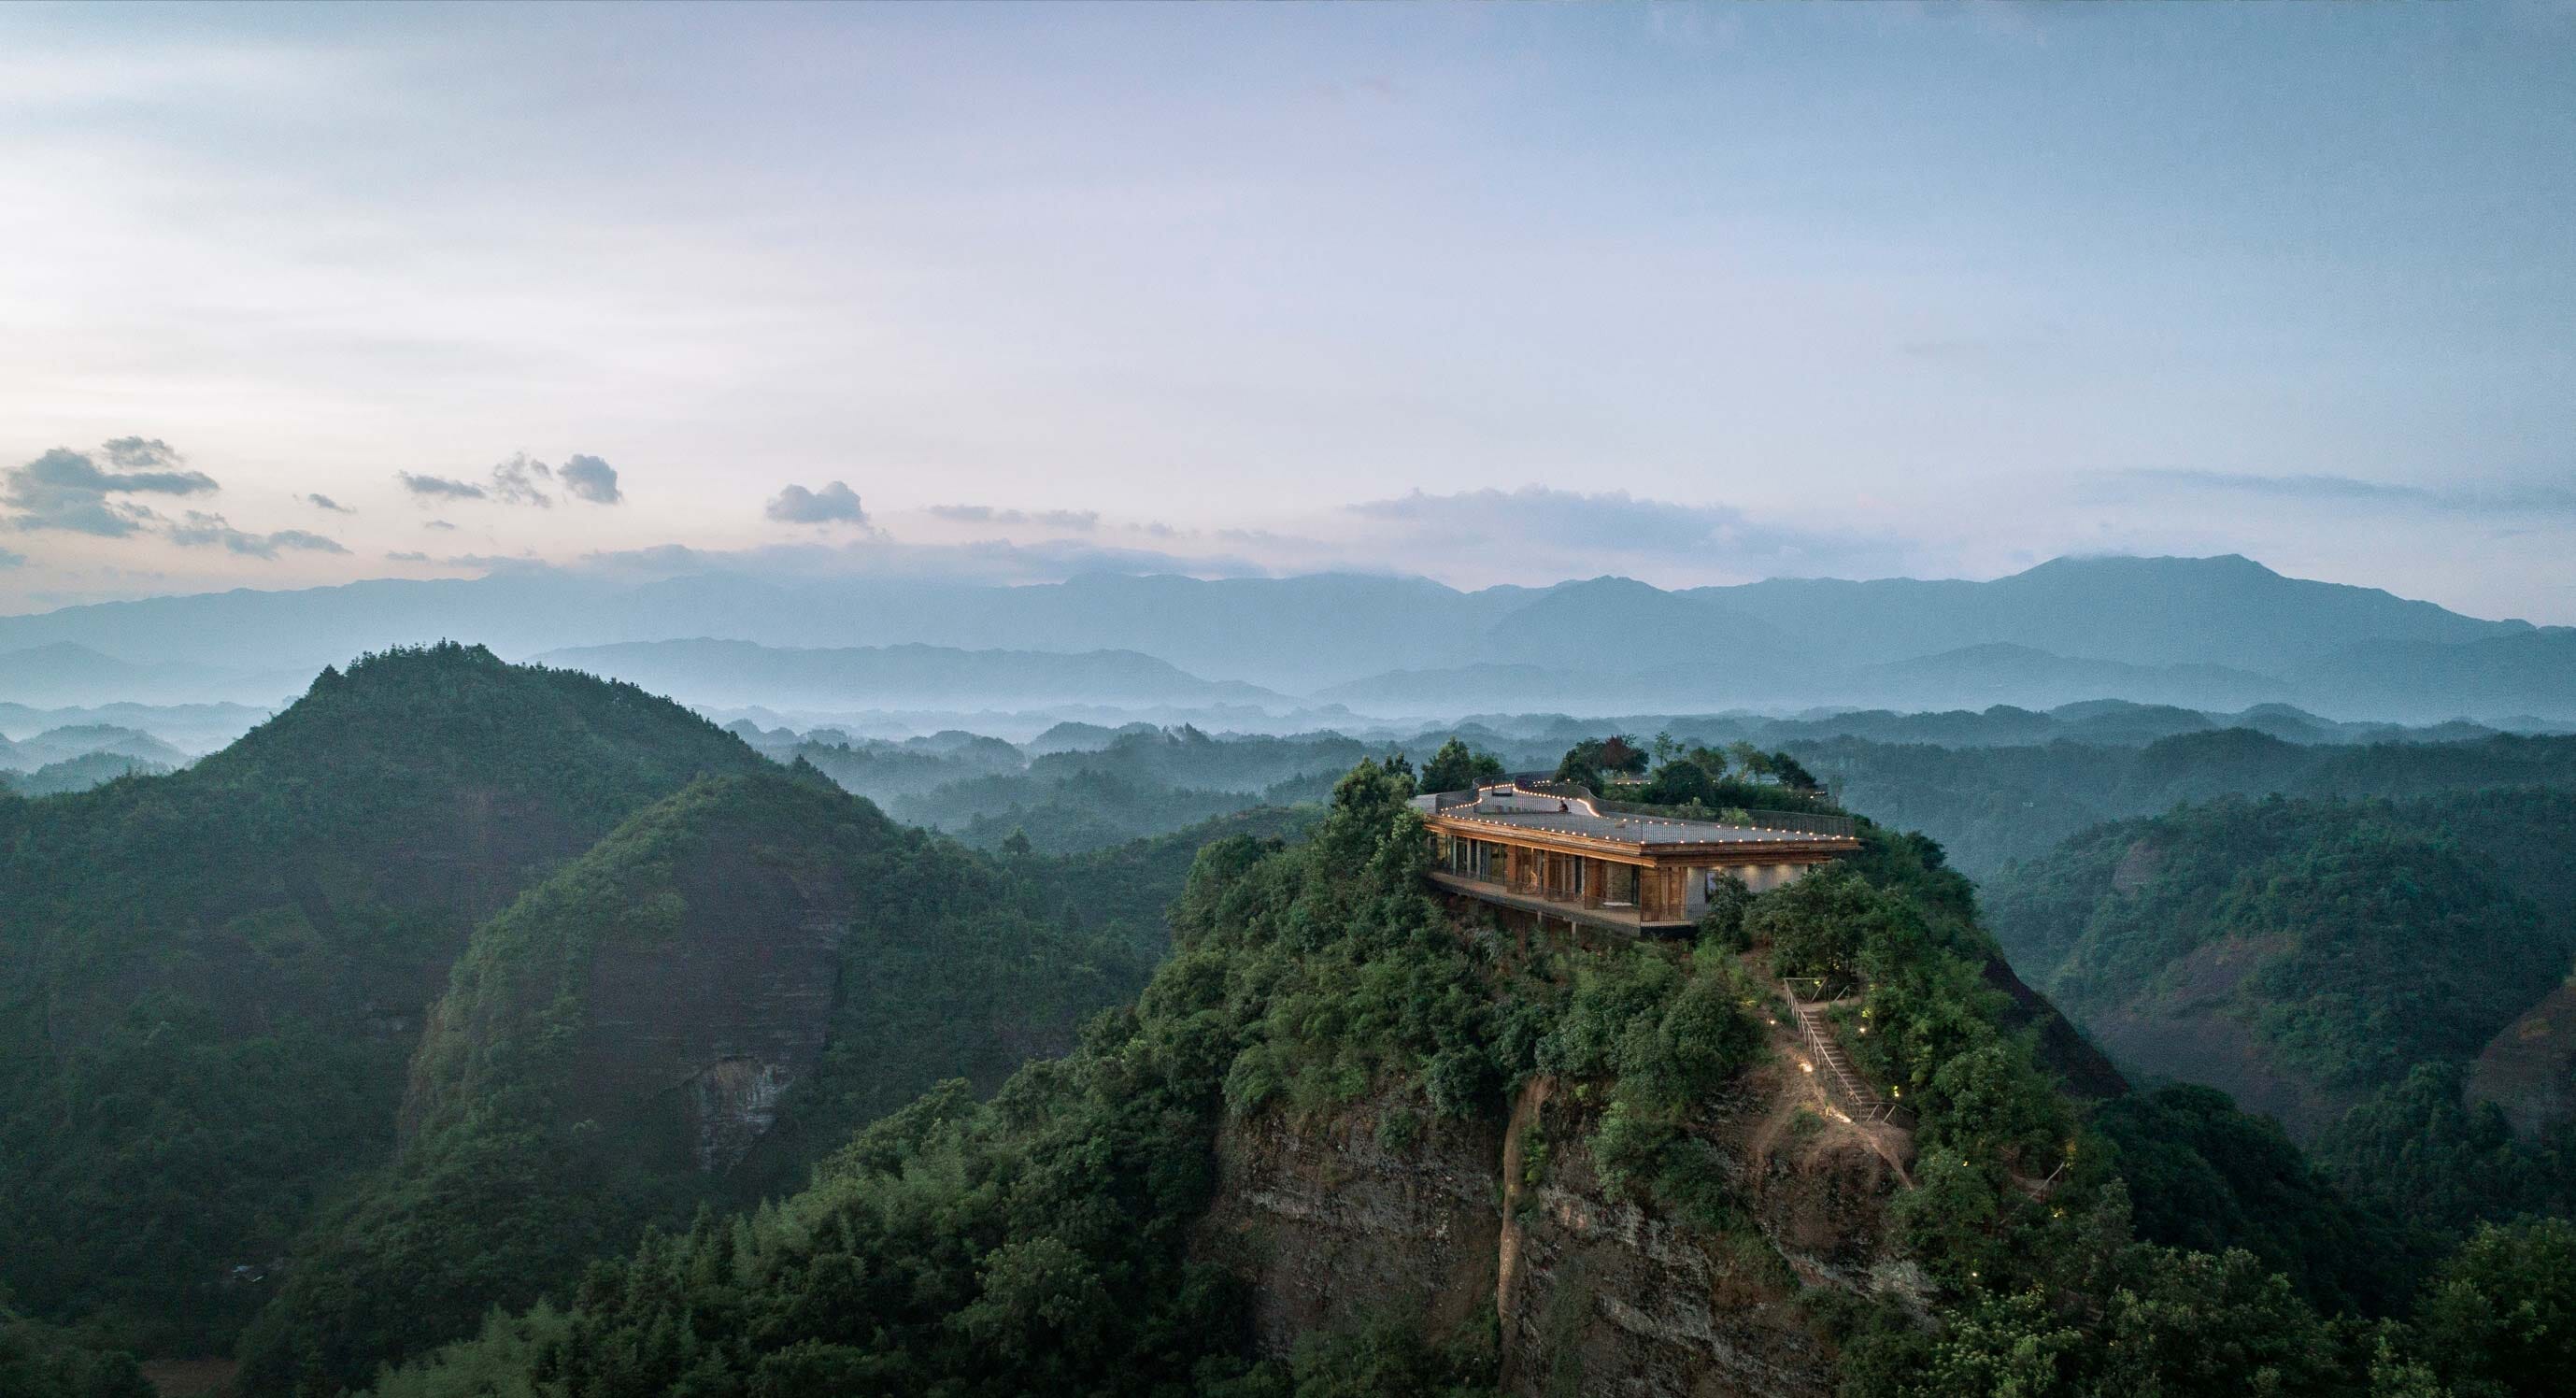 Eagle Rock Cliffs Hotel Perches On Top Of Mountains